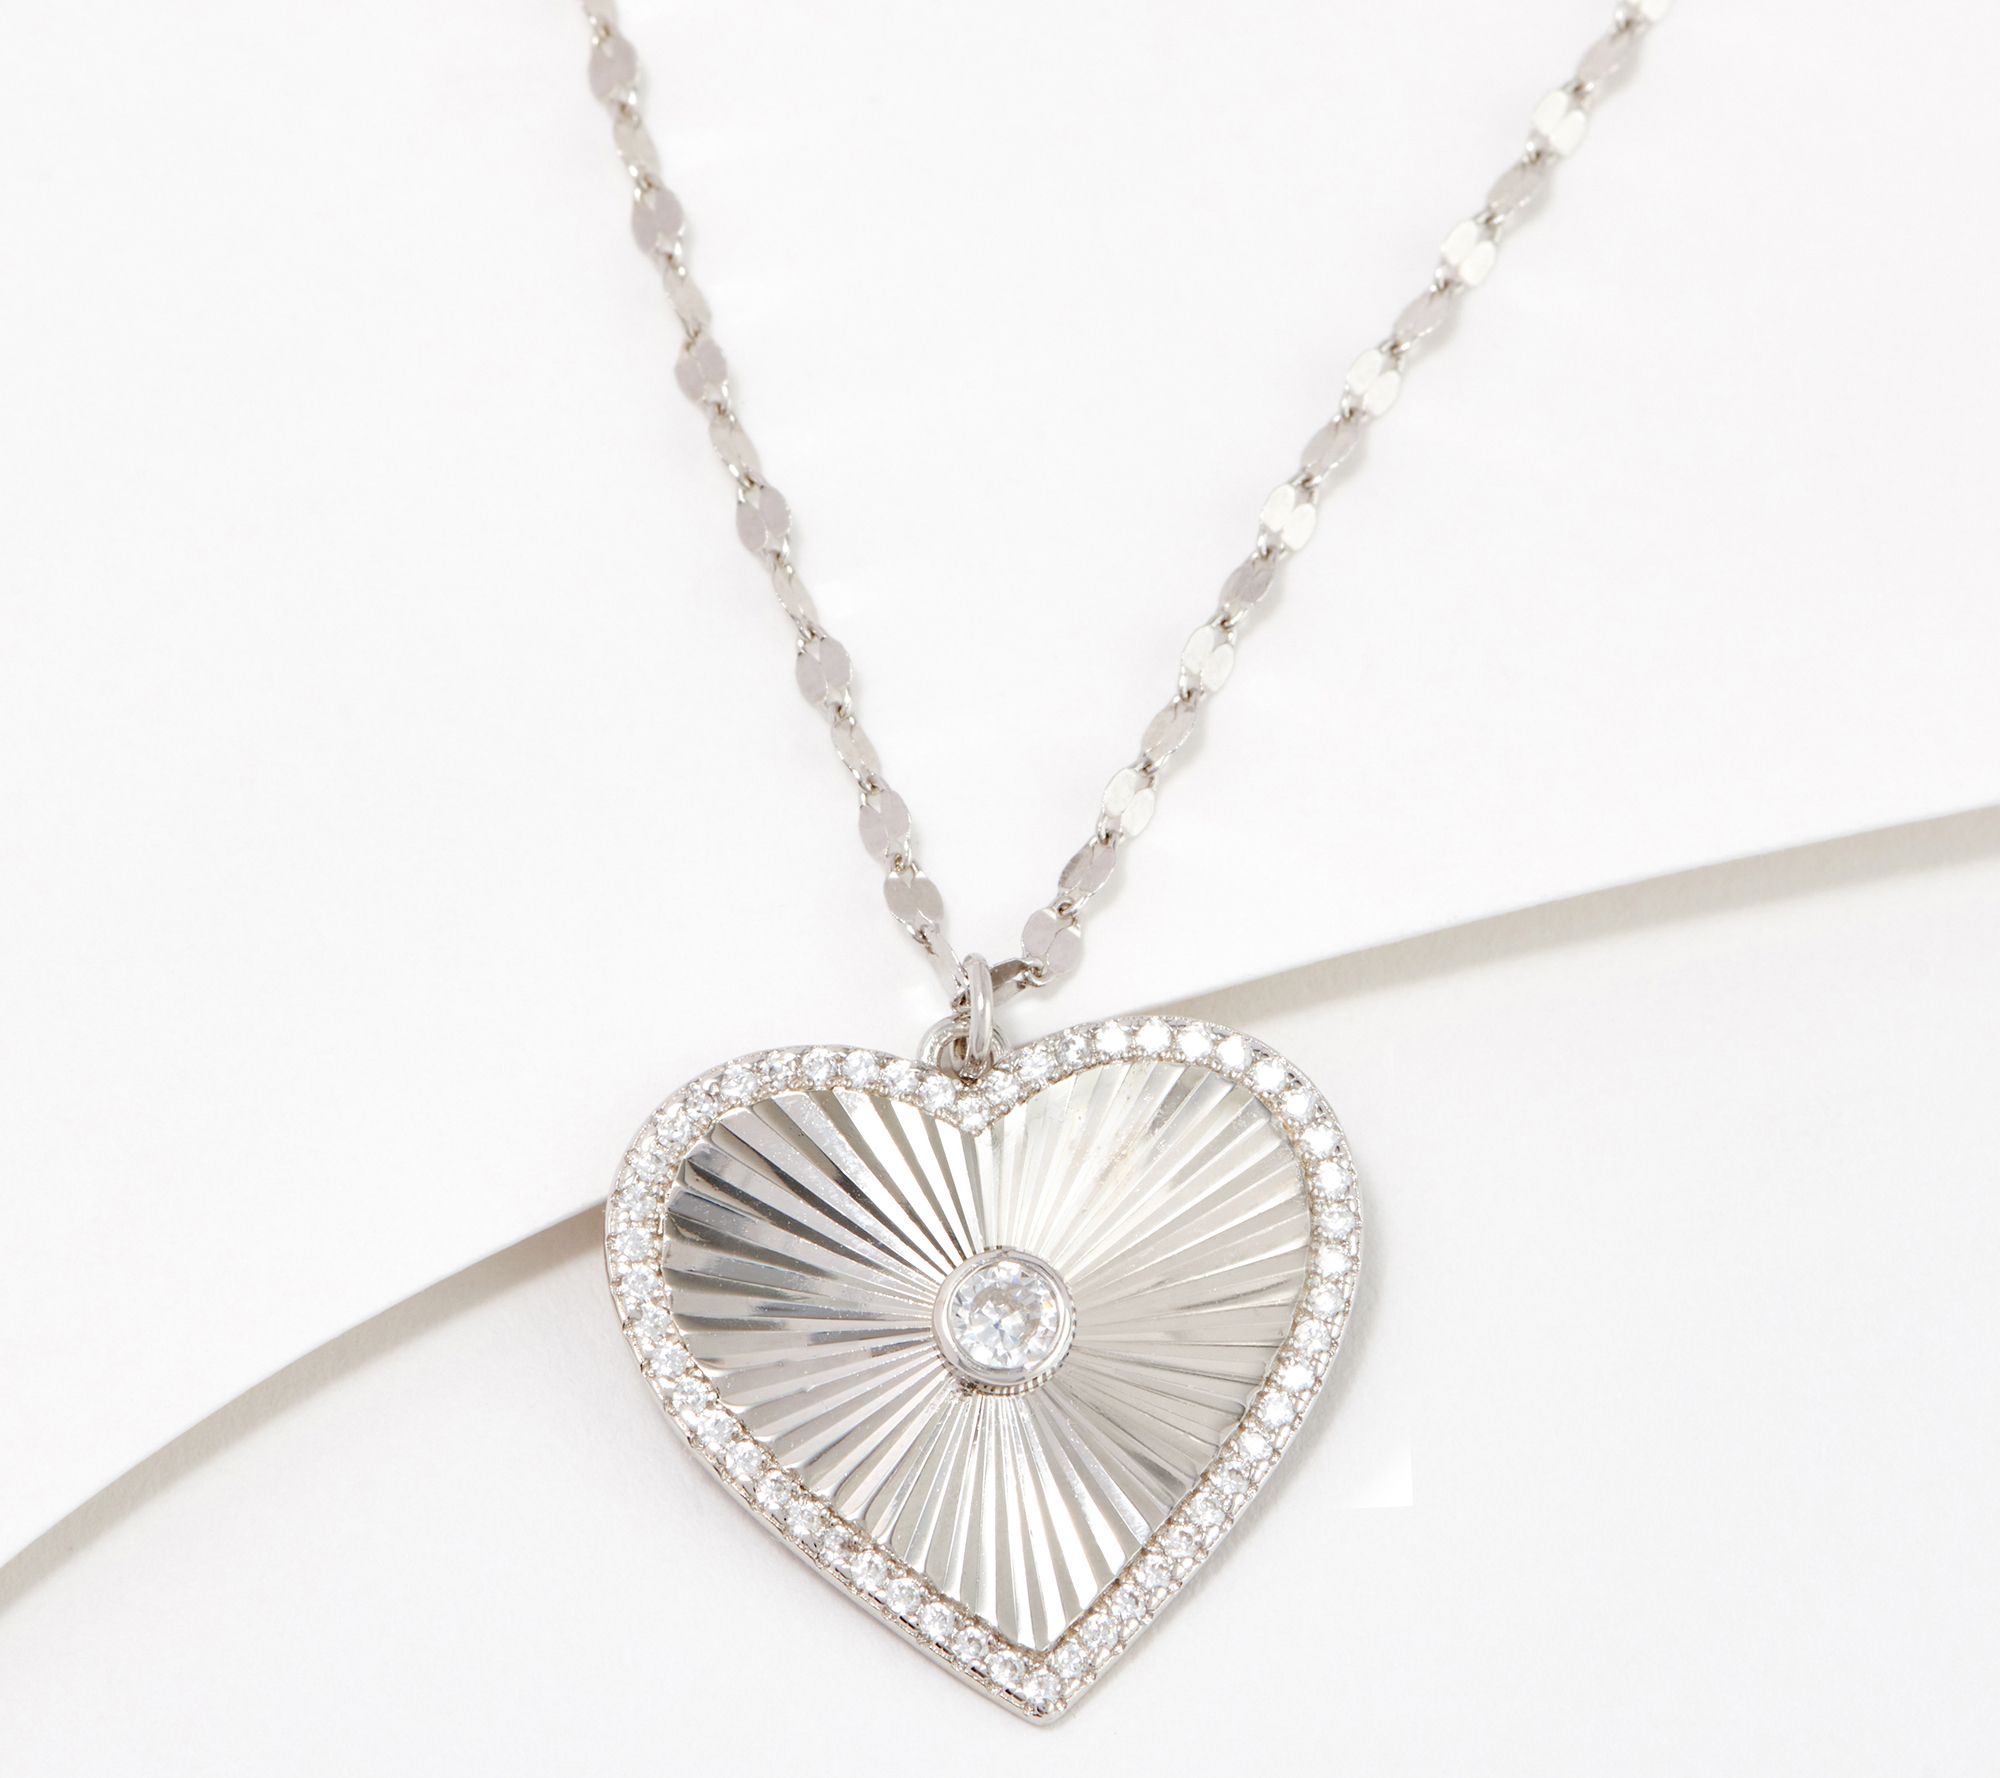 Tiara Sterling Silver Gourmette Chain Necklace : Target